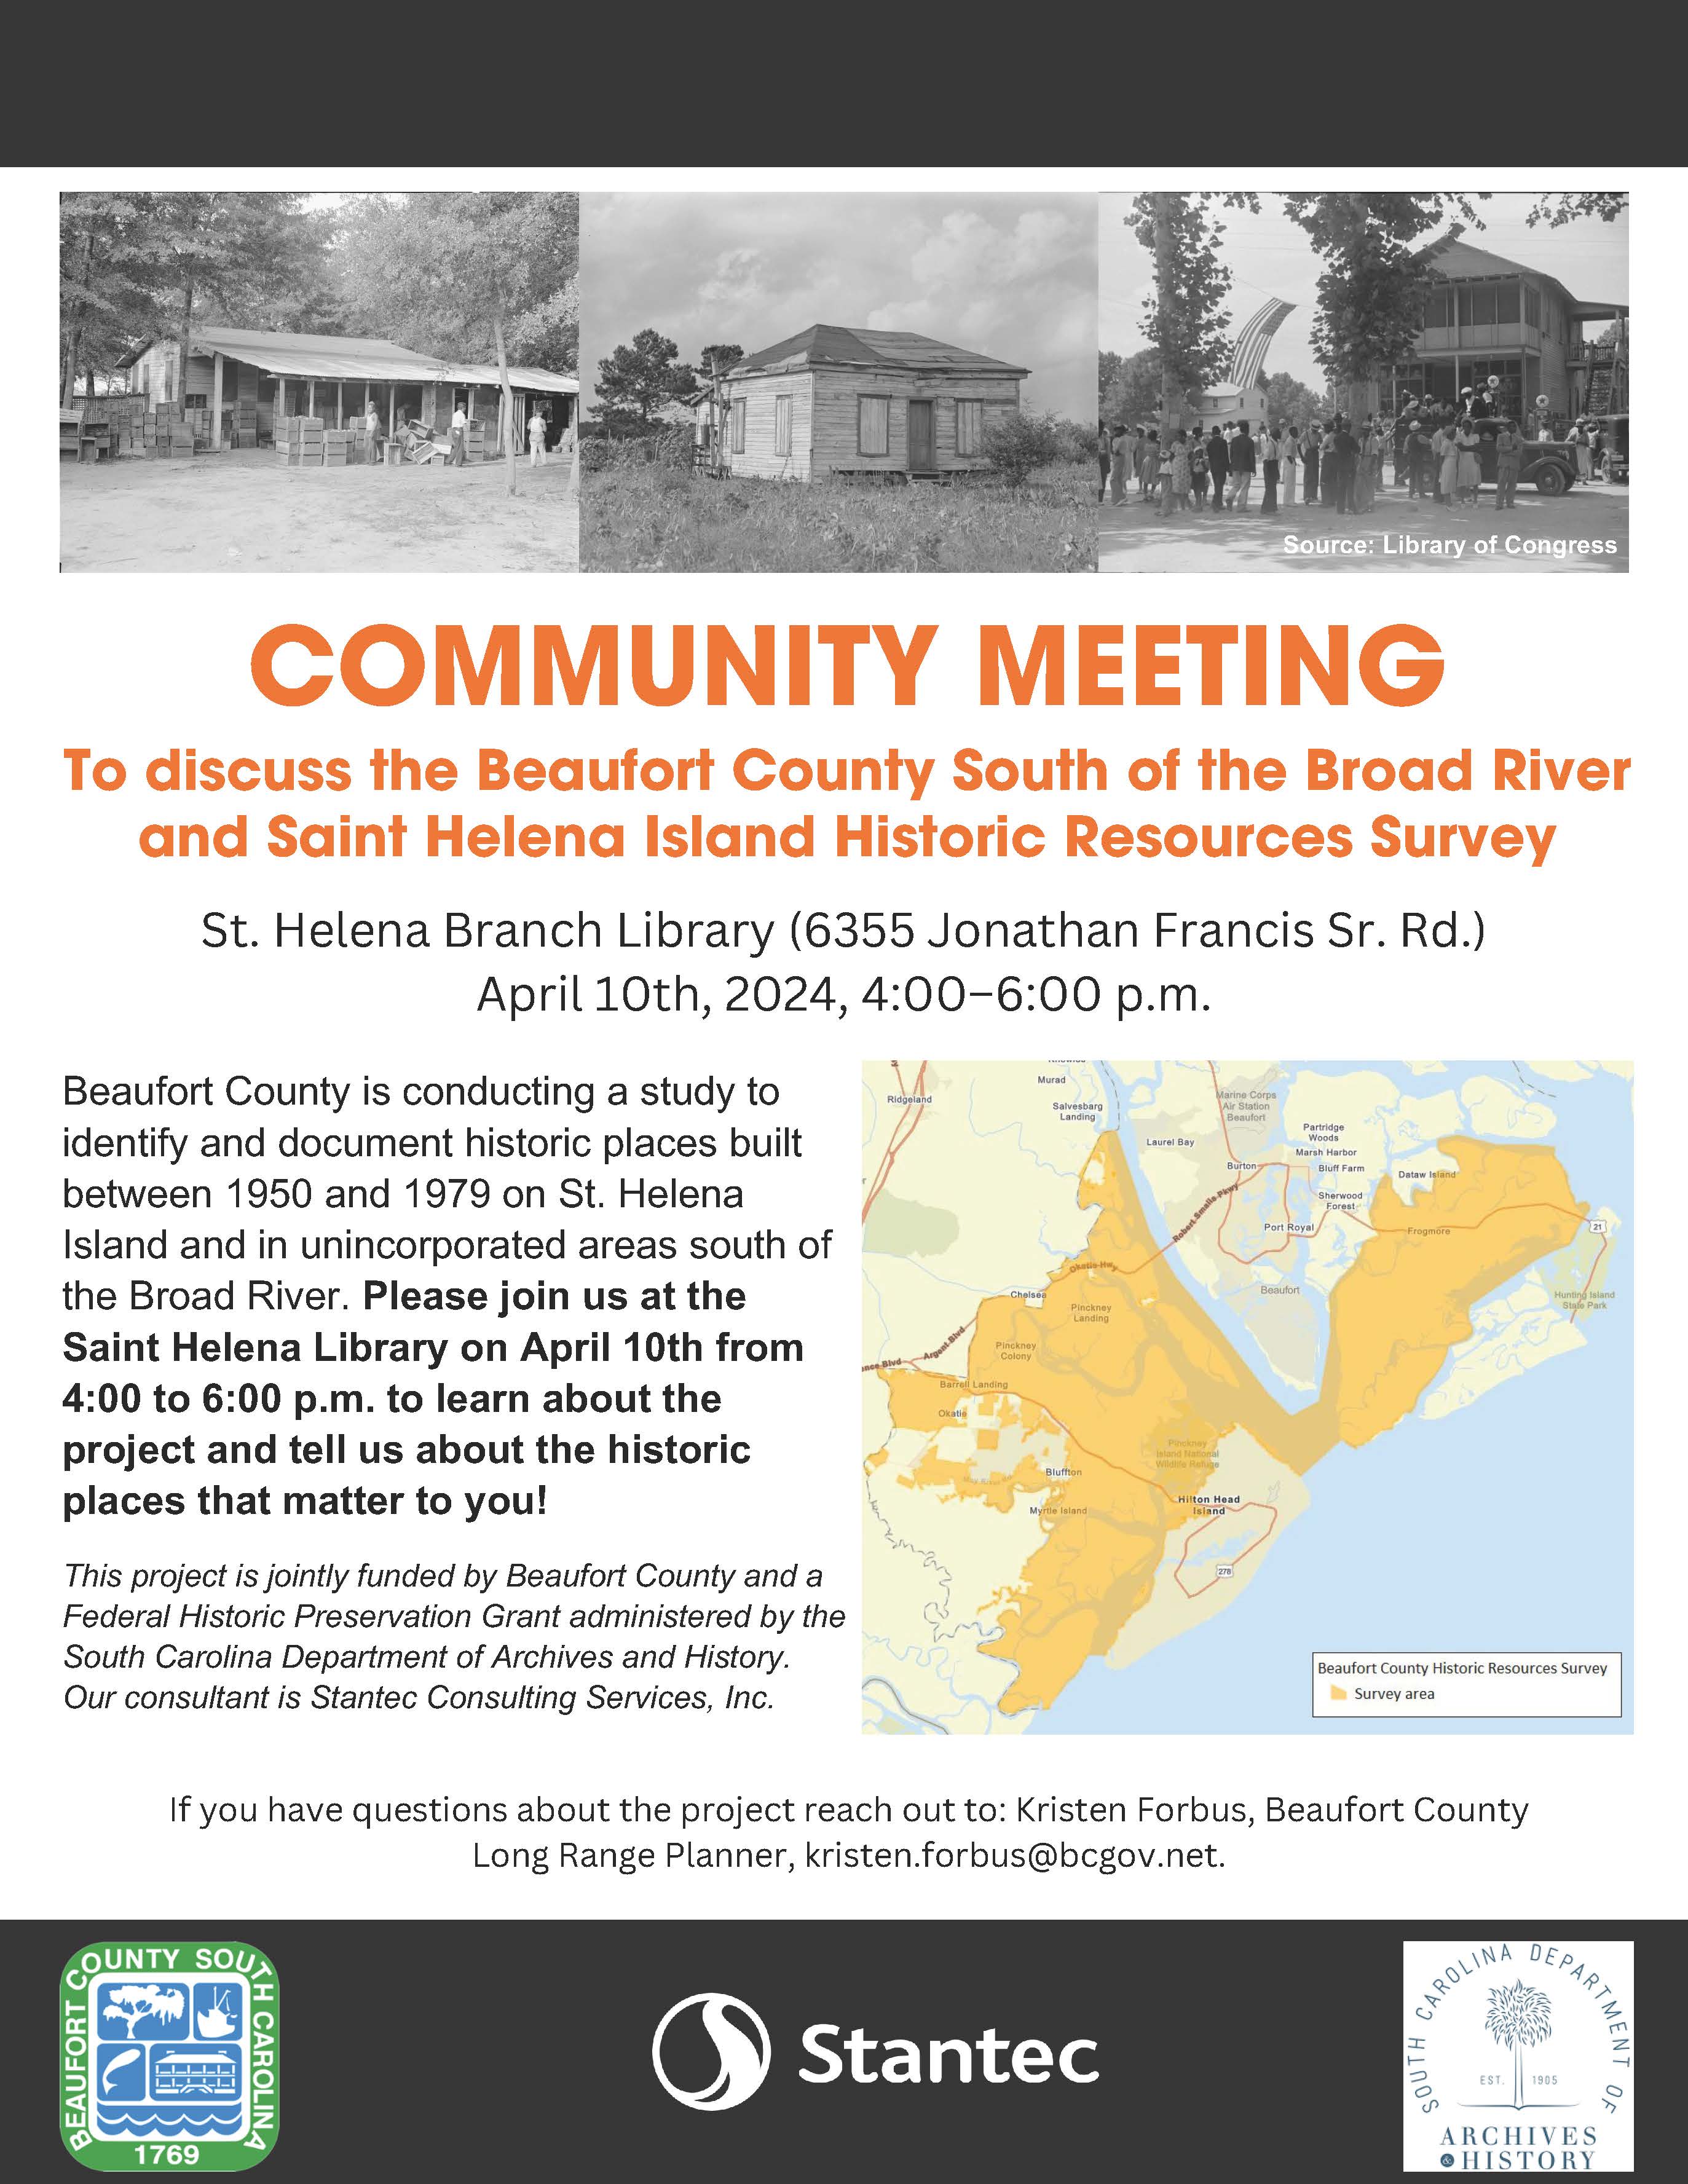 Beaufort County Hosting Community Meeting to Discuss South of the Broad and St. Helena Island Historic Resources Survey